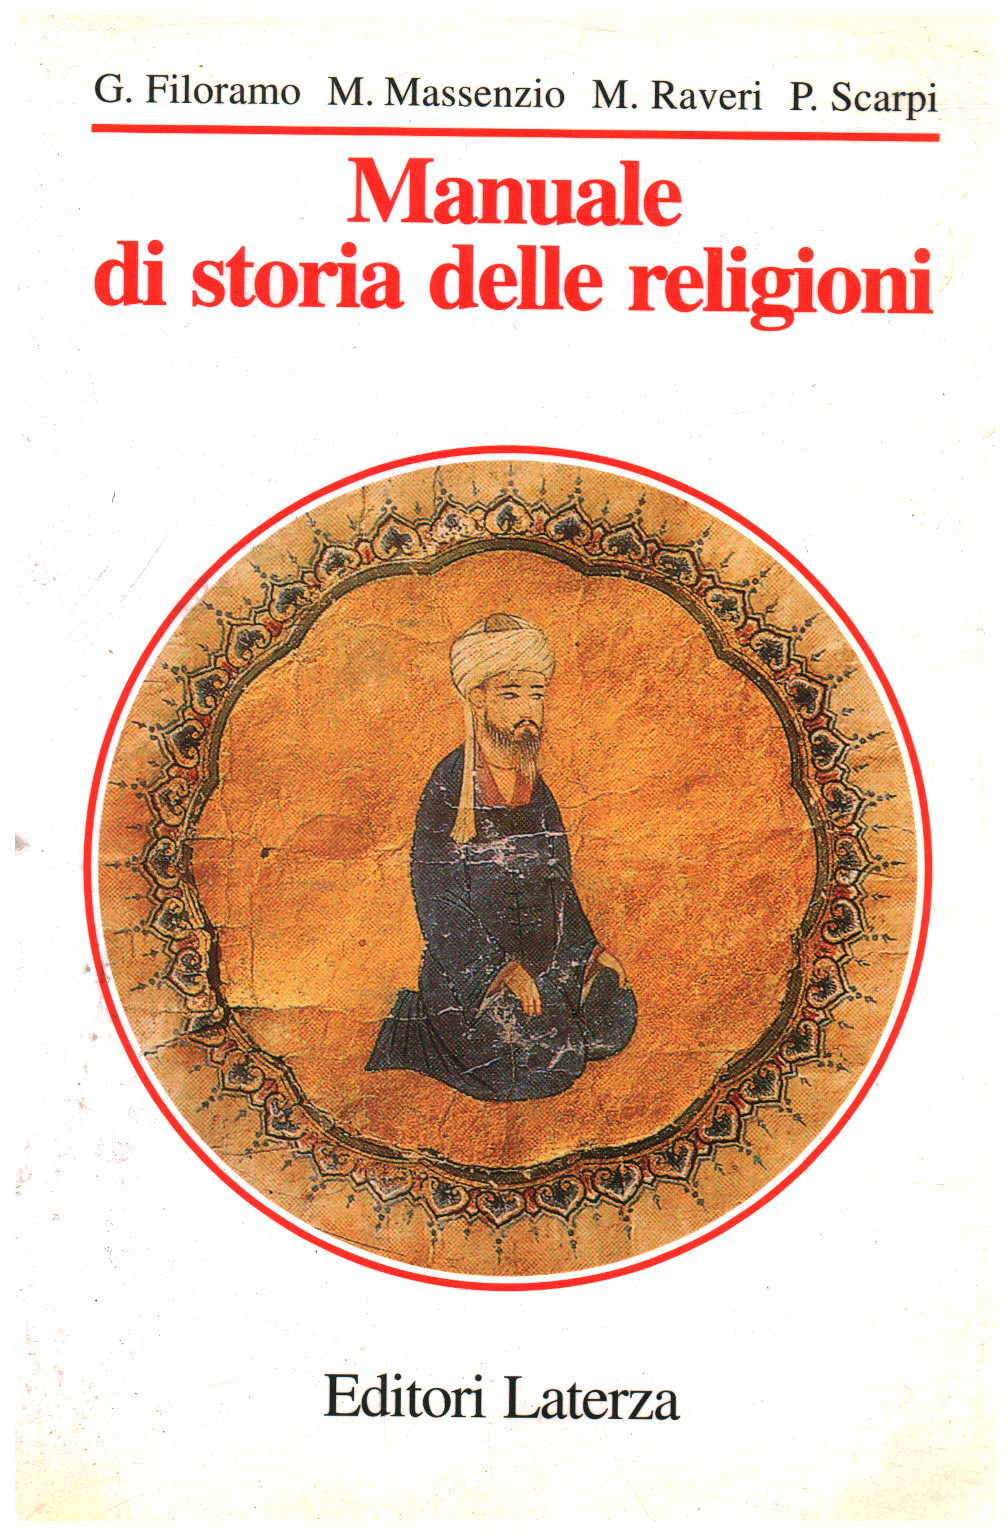 Manual of history of religions